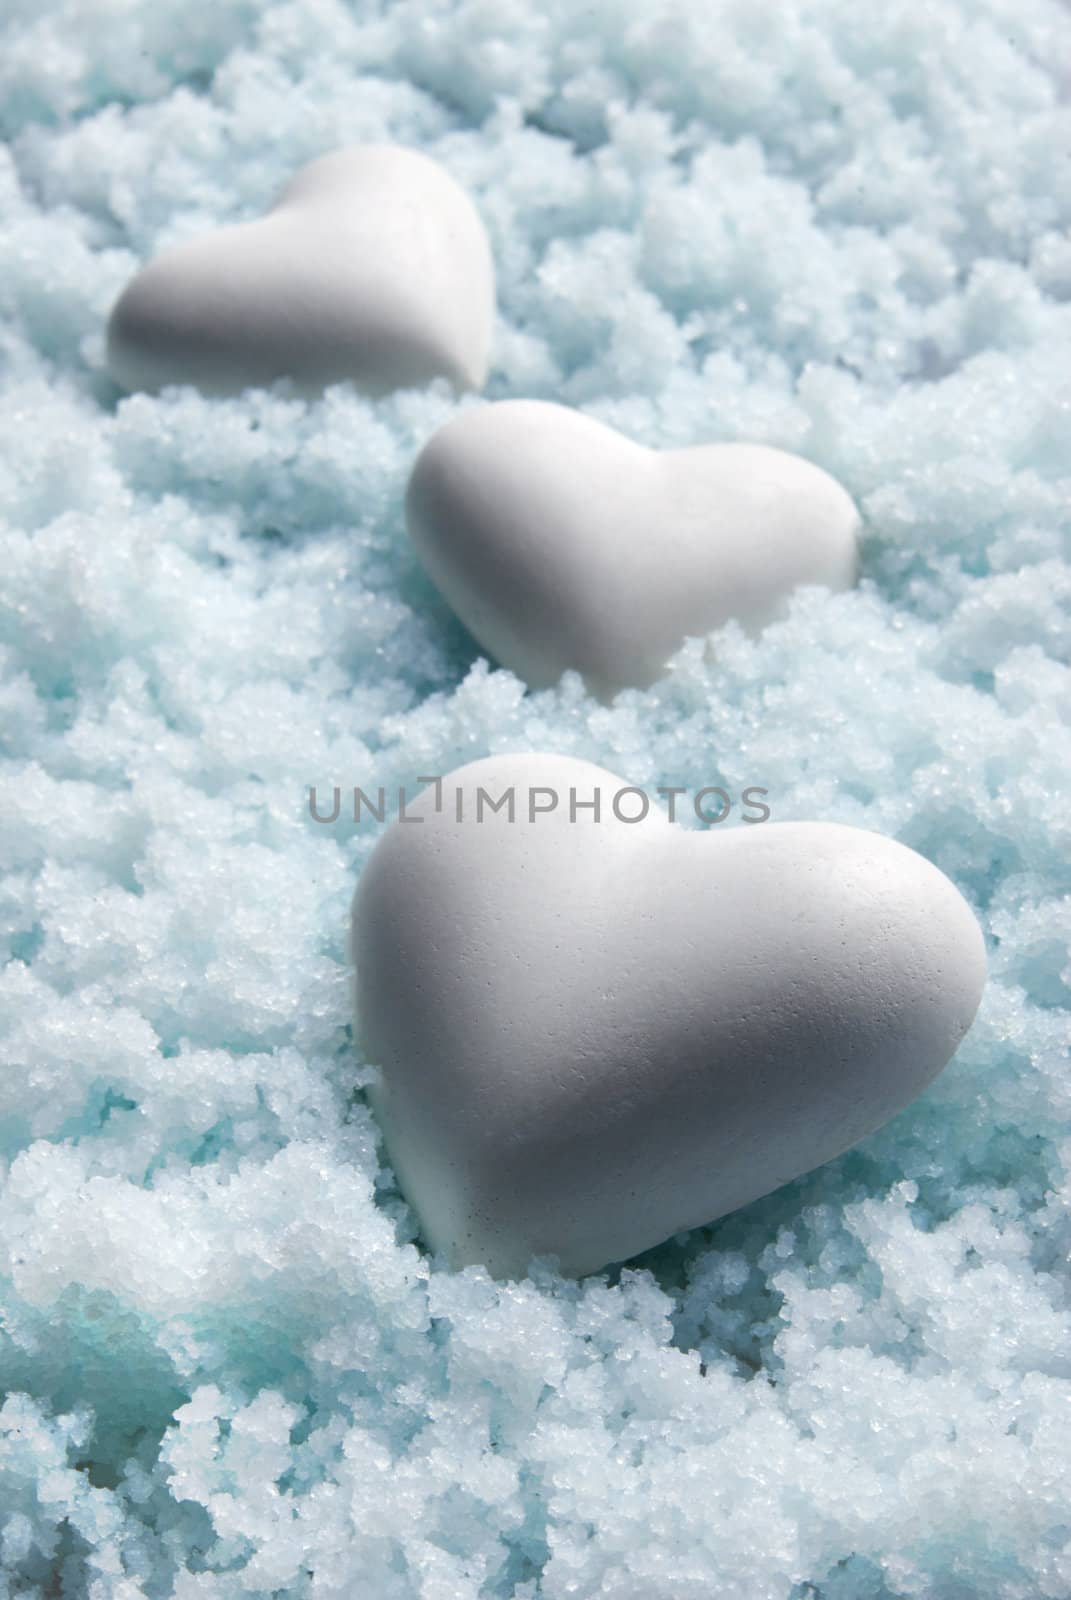 Blank white Hearts on Snow Background. Small Depth of Field. Blue tinted